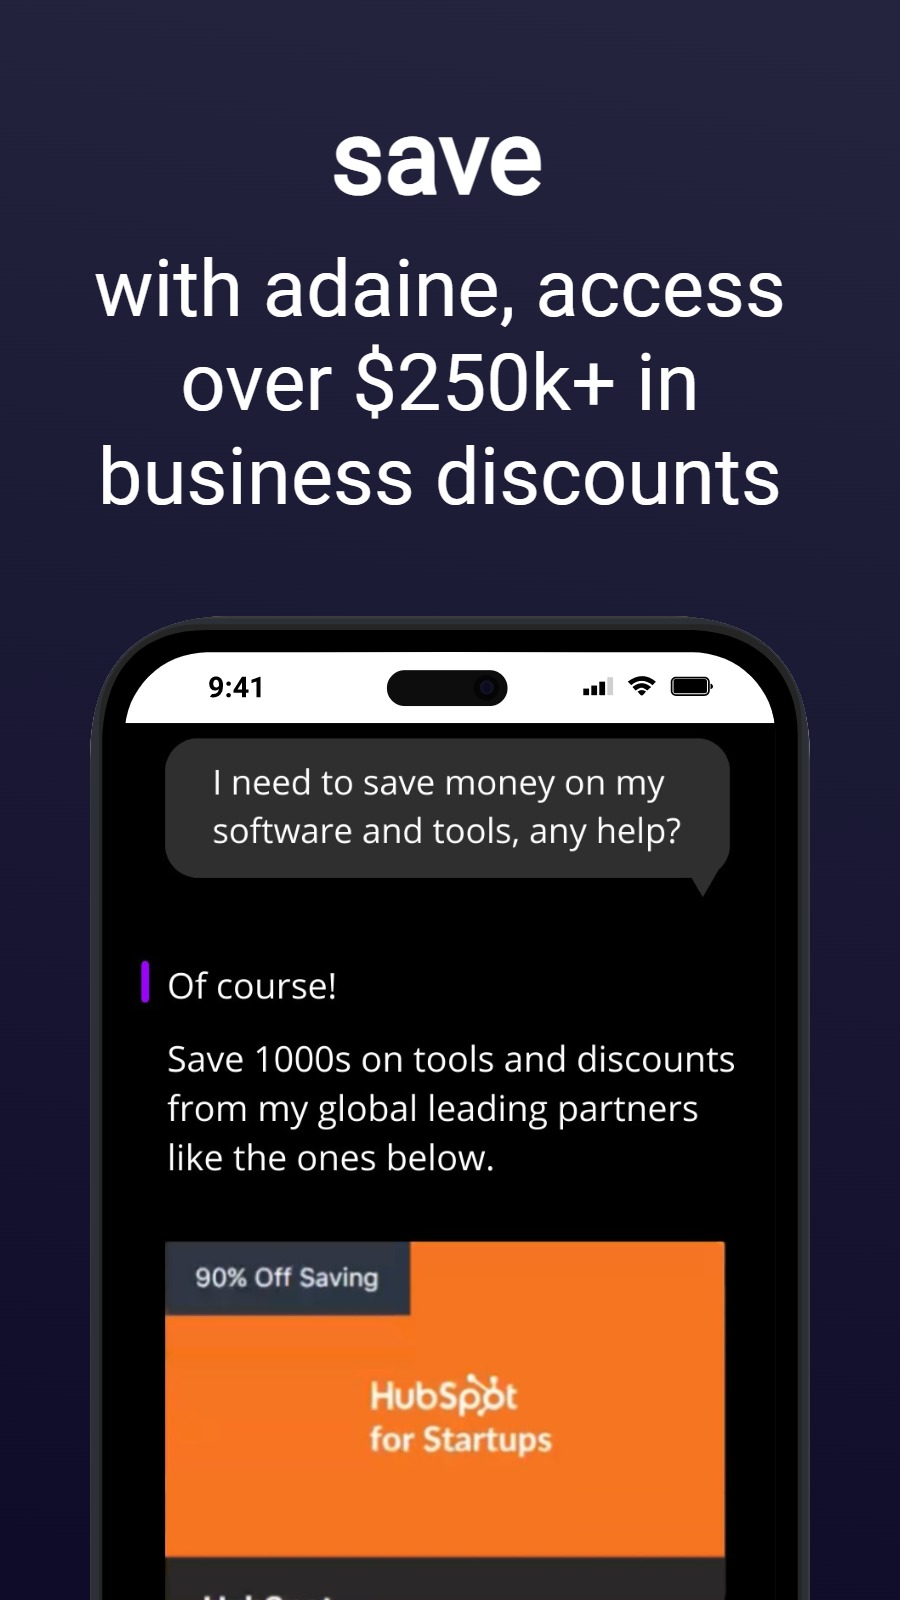 save - with adaine, access over $250k+ in business discounts